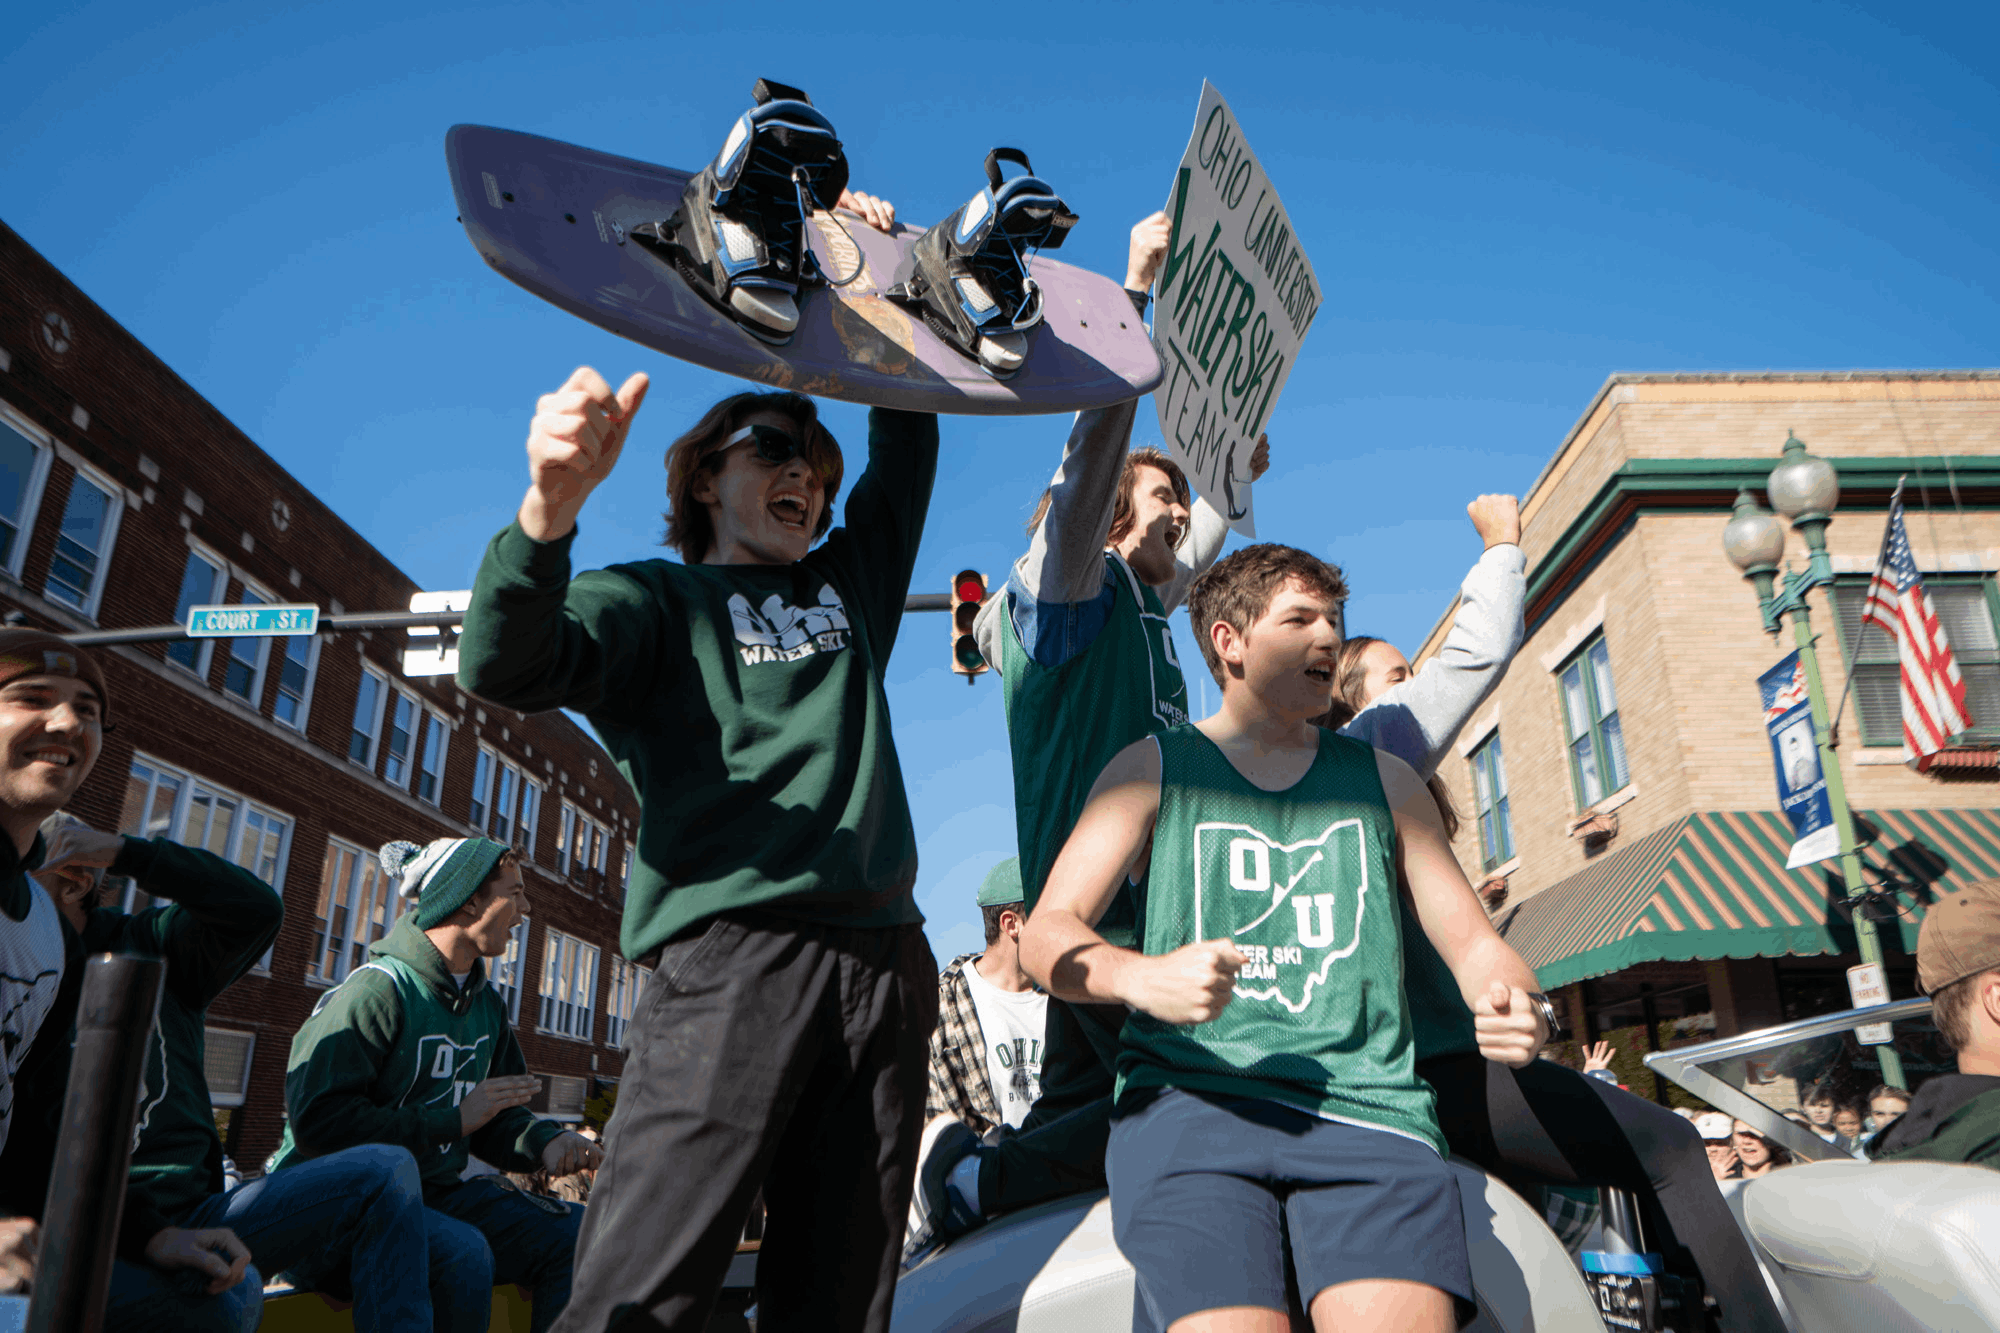 The Ohio University Waterski Team was among the many student organizations and community groups participating in this year’s Homecoming Parade. 